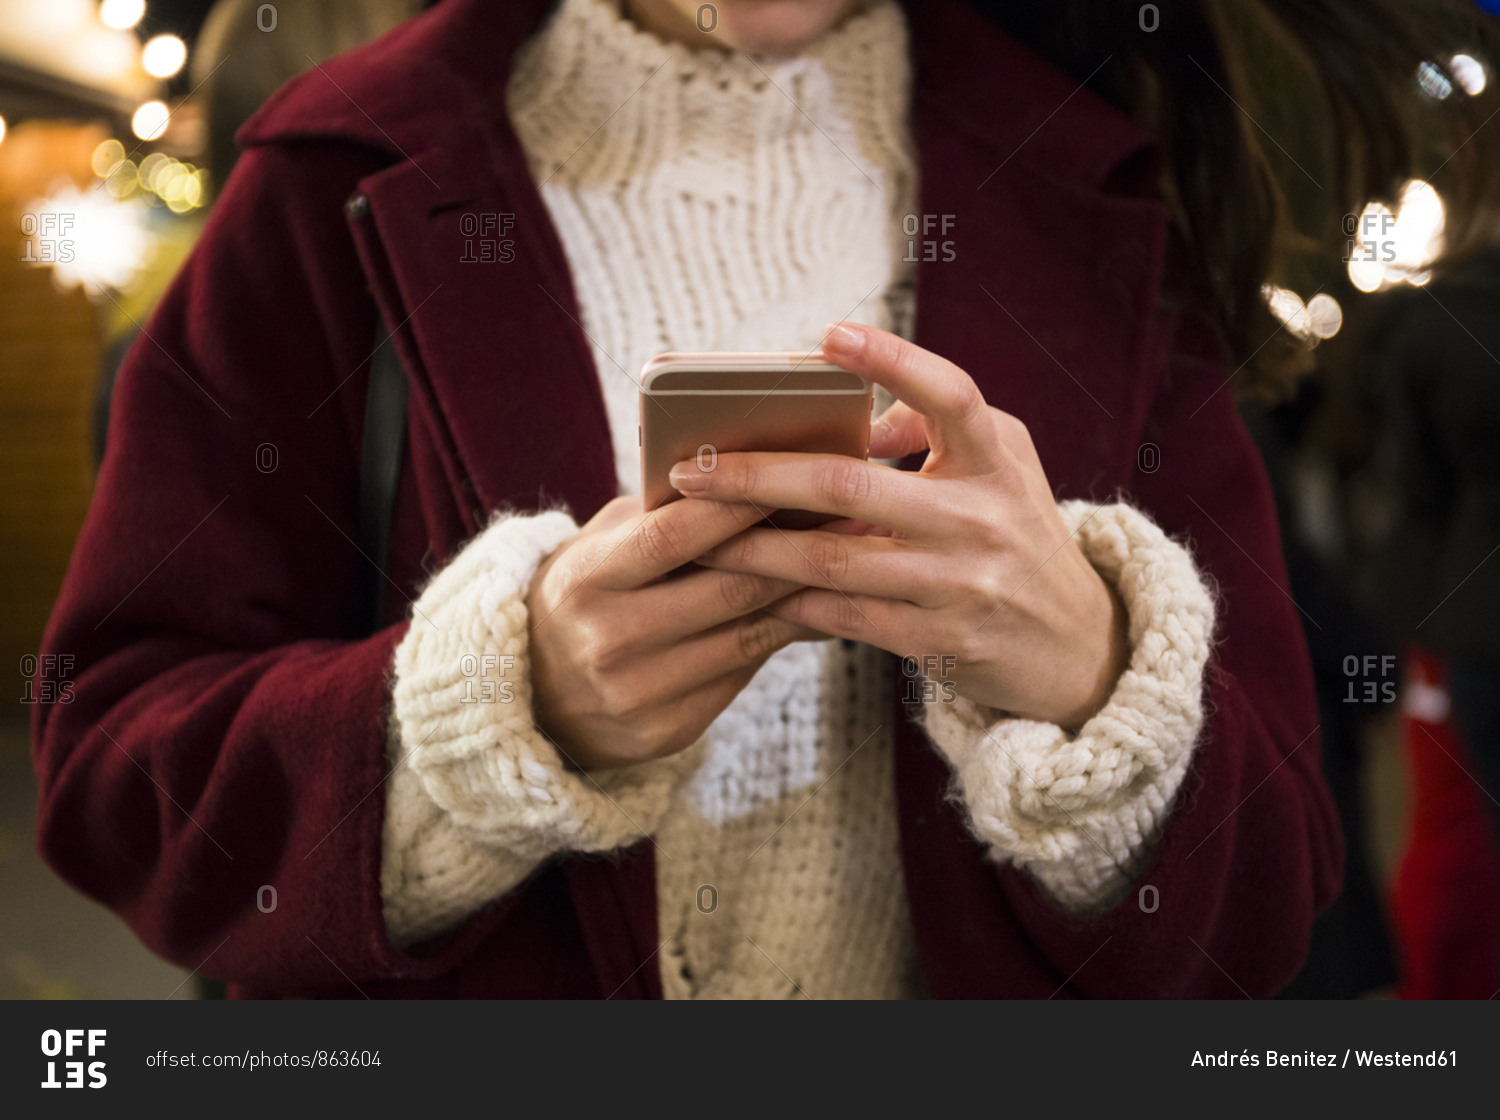 Hands of young woman holding smartphone- close-up